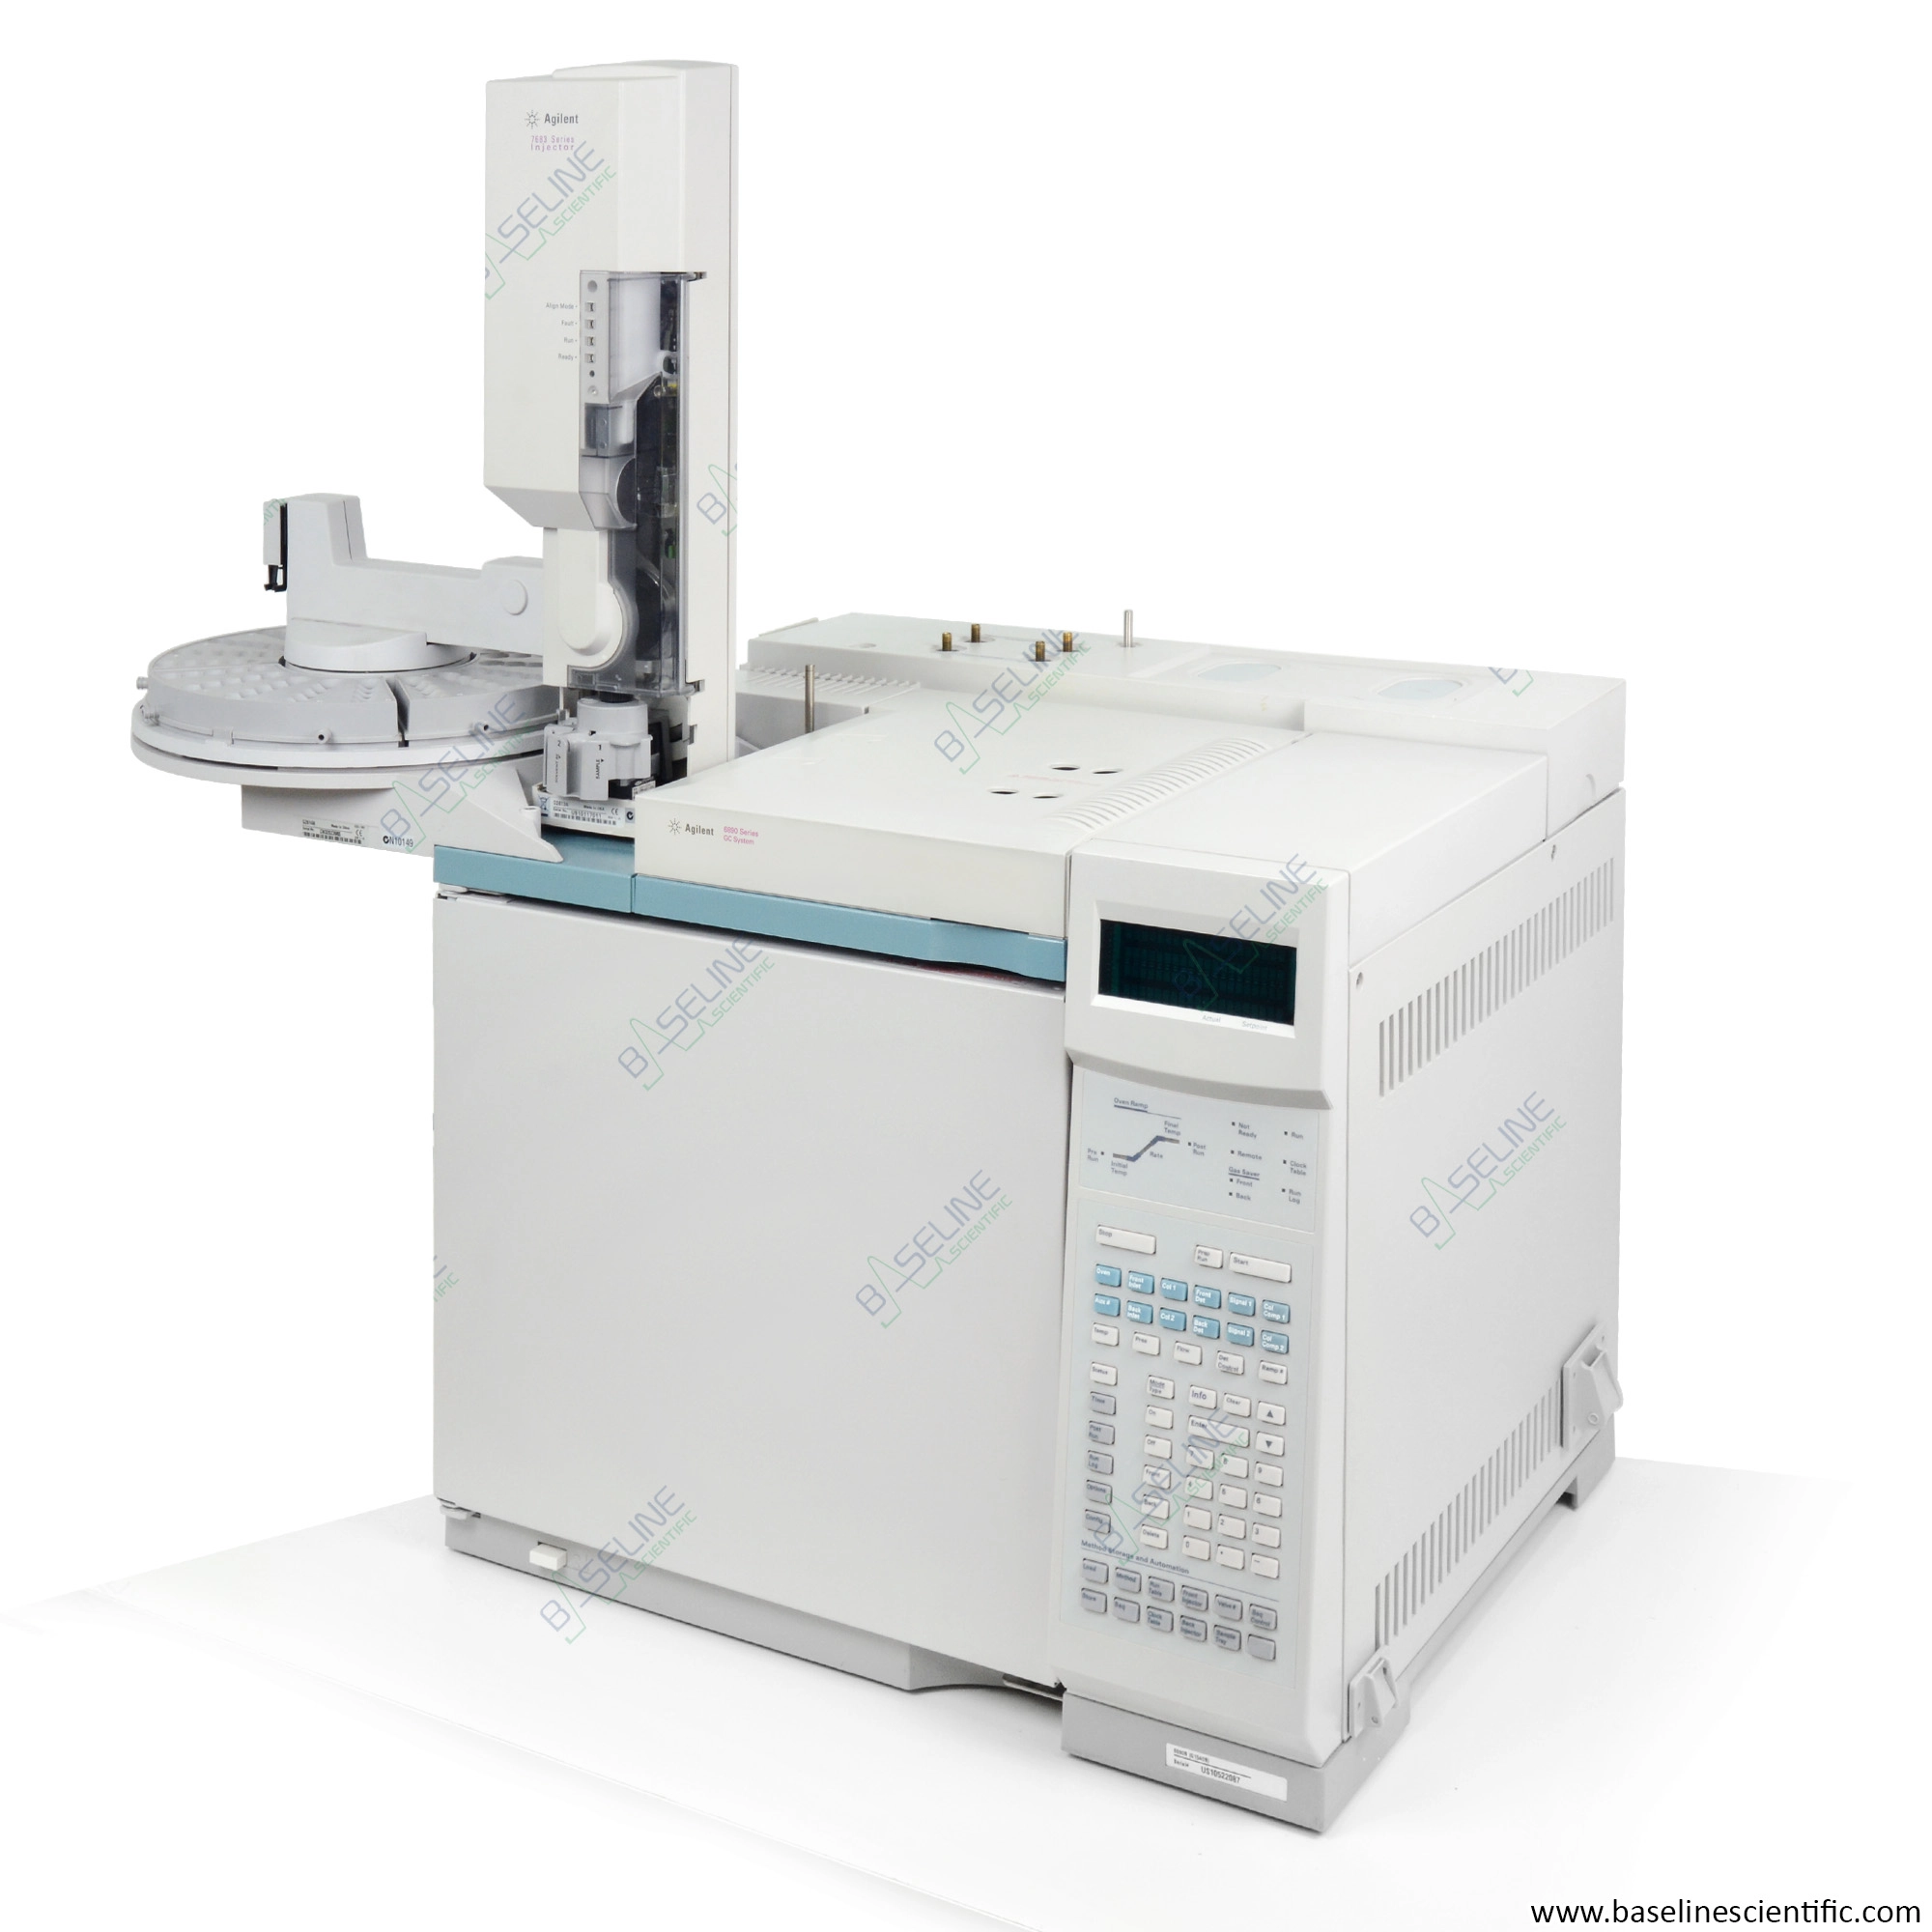 Agilent 6890 GC with Single PP TCD and 7683 Series Autosampler